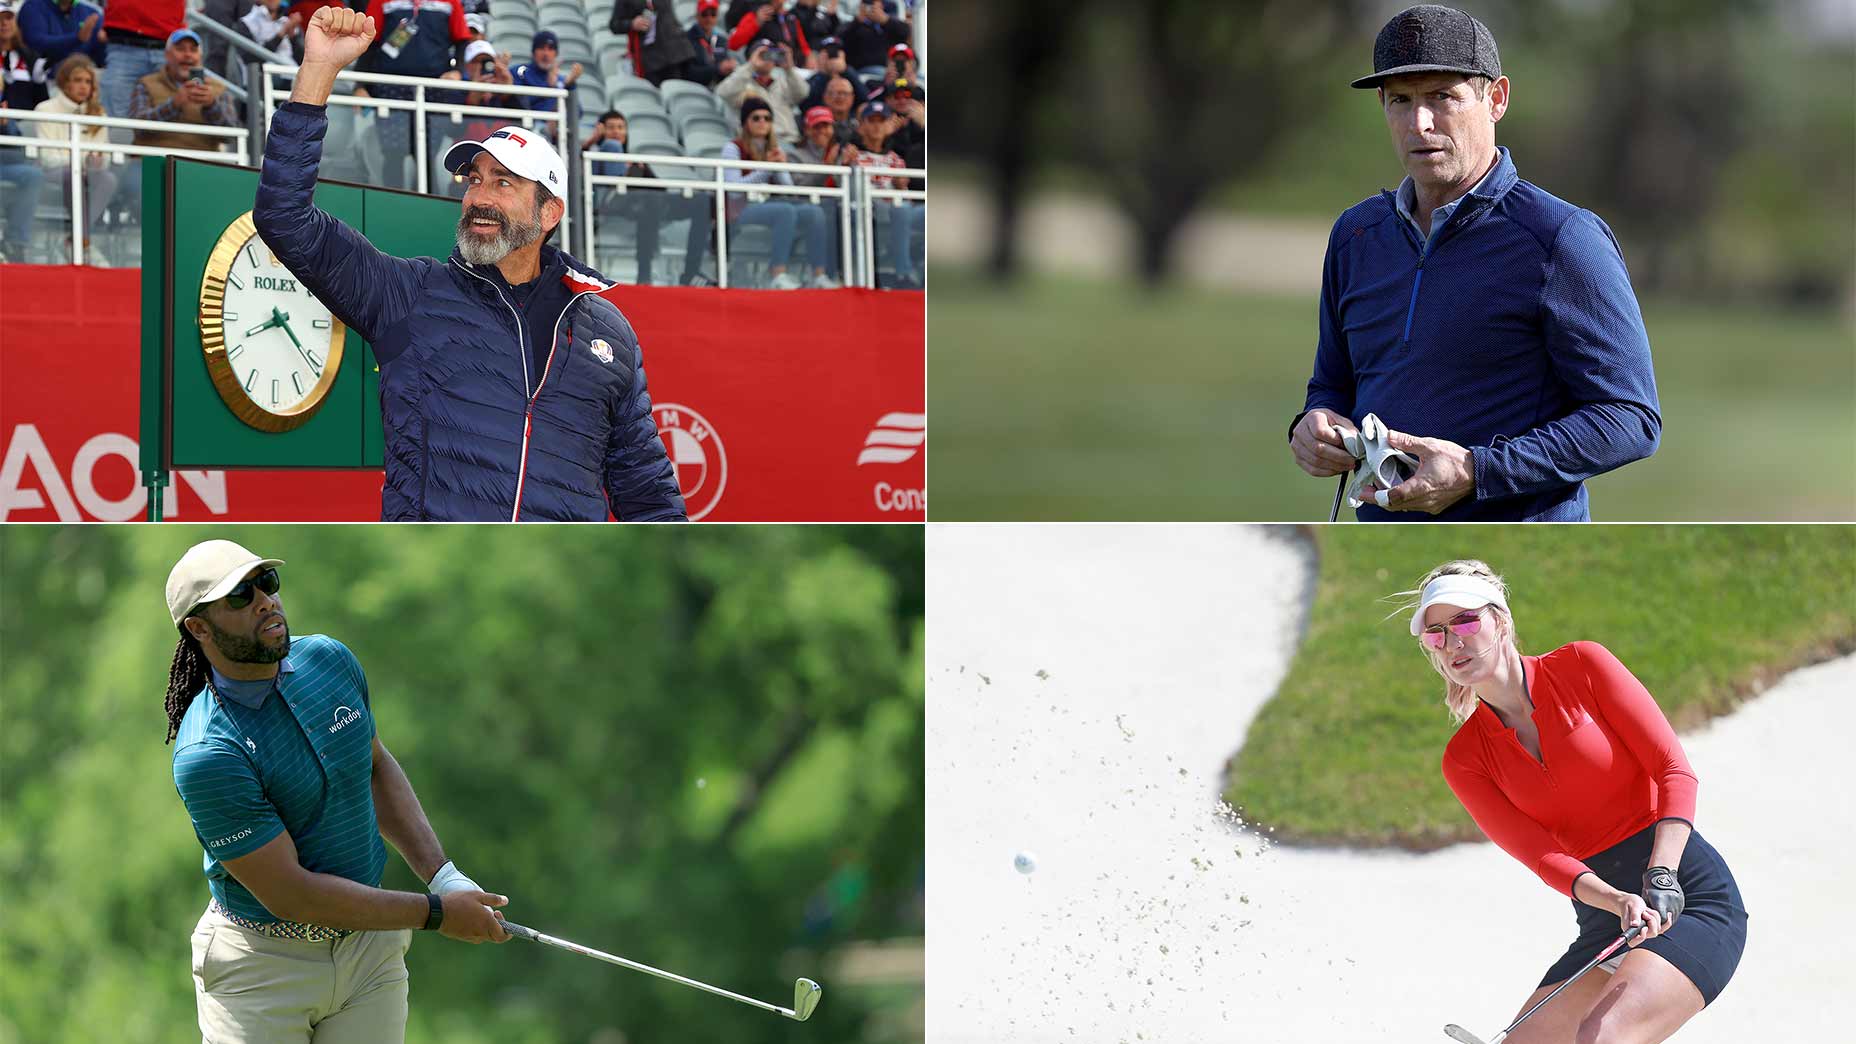 Handicaps of athletes, celebrities within the American Century Championship